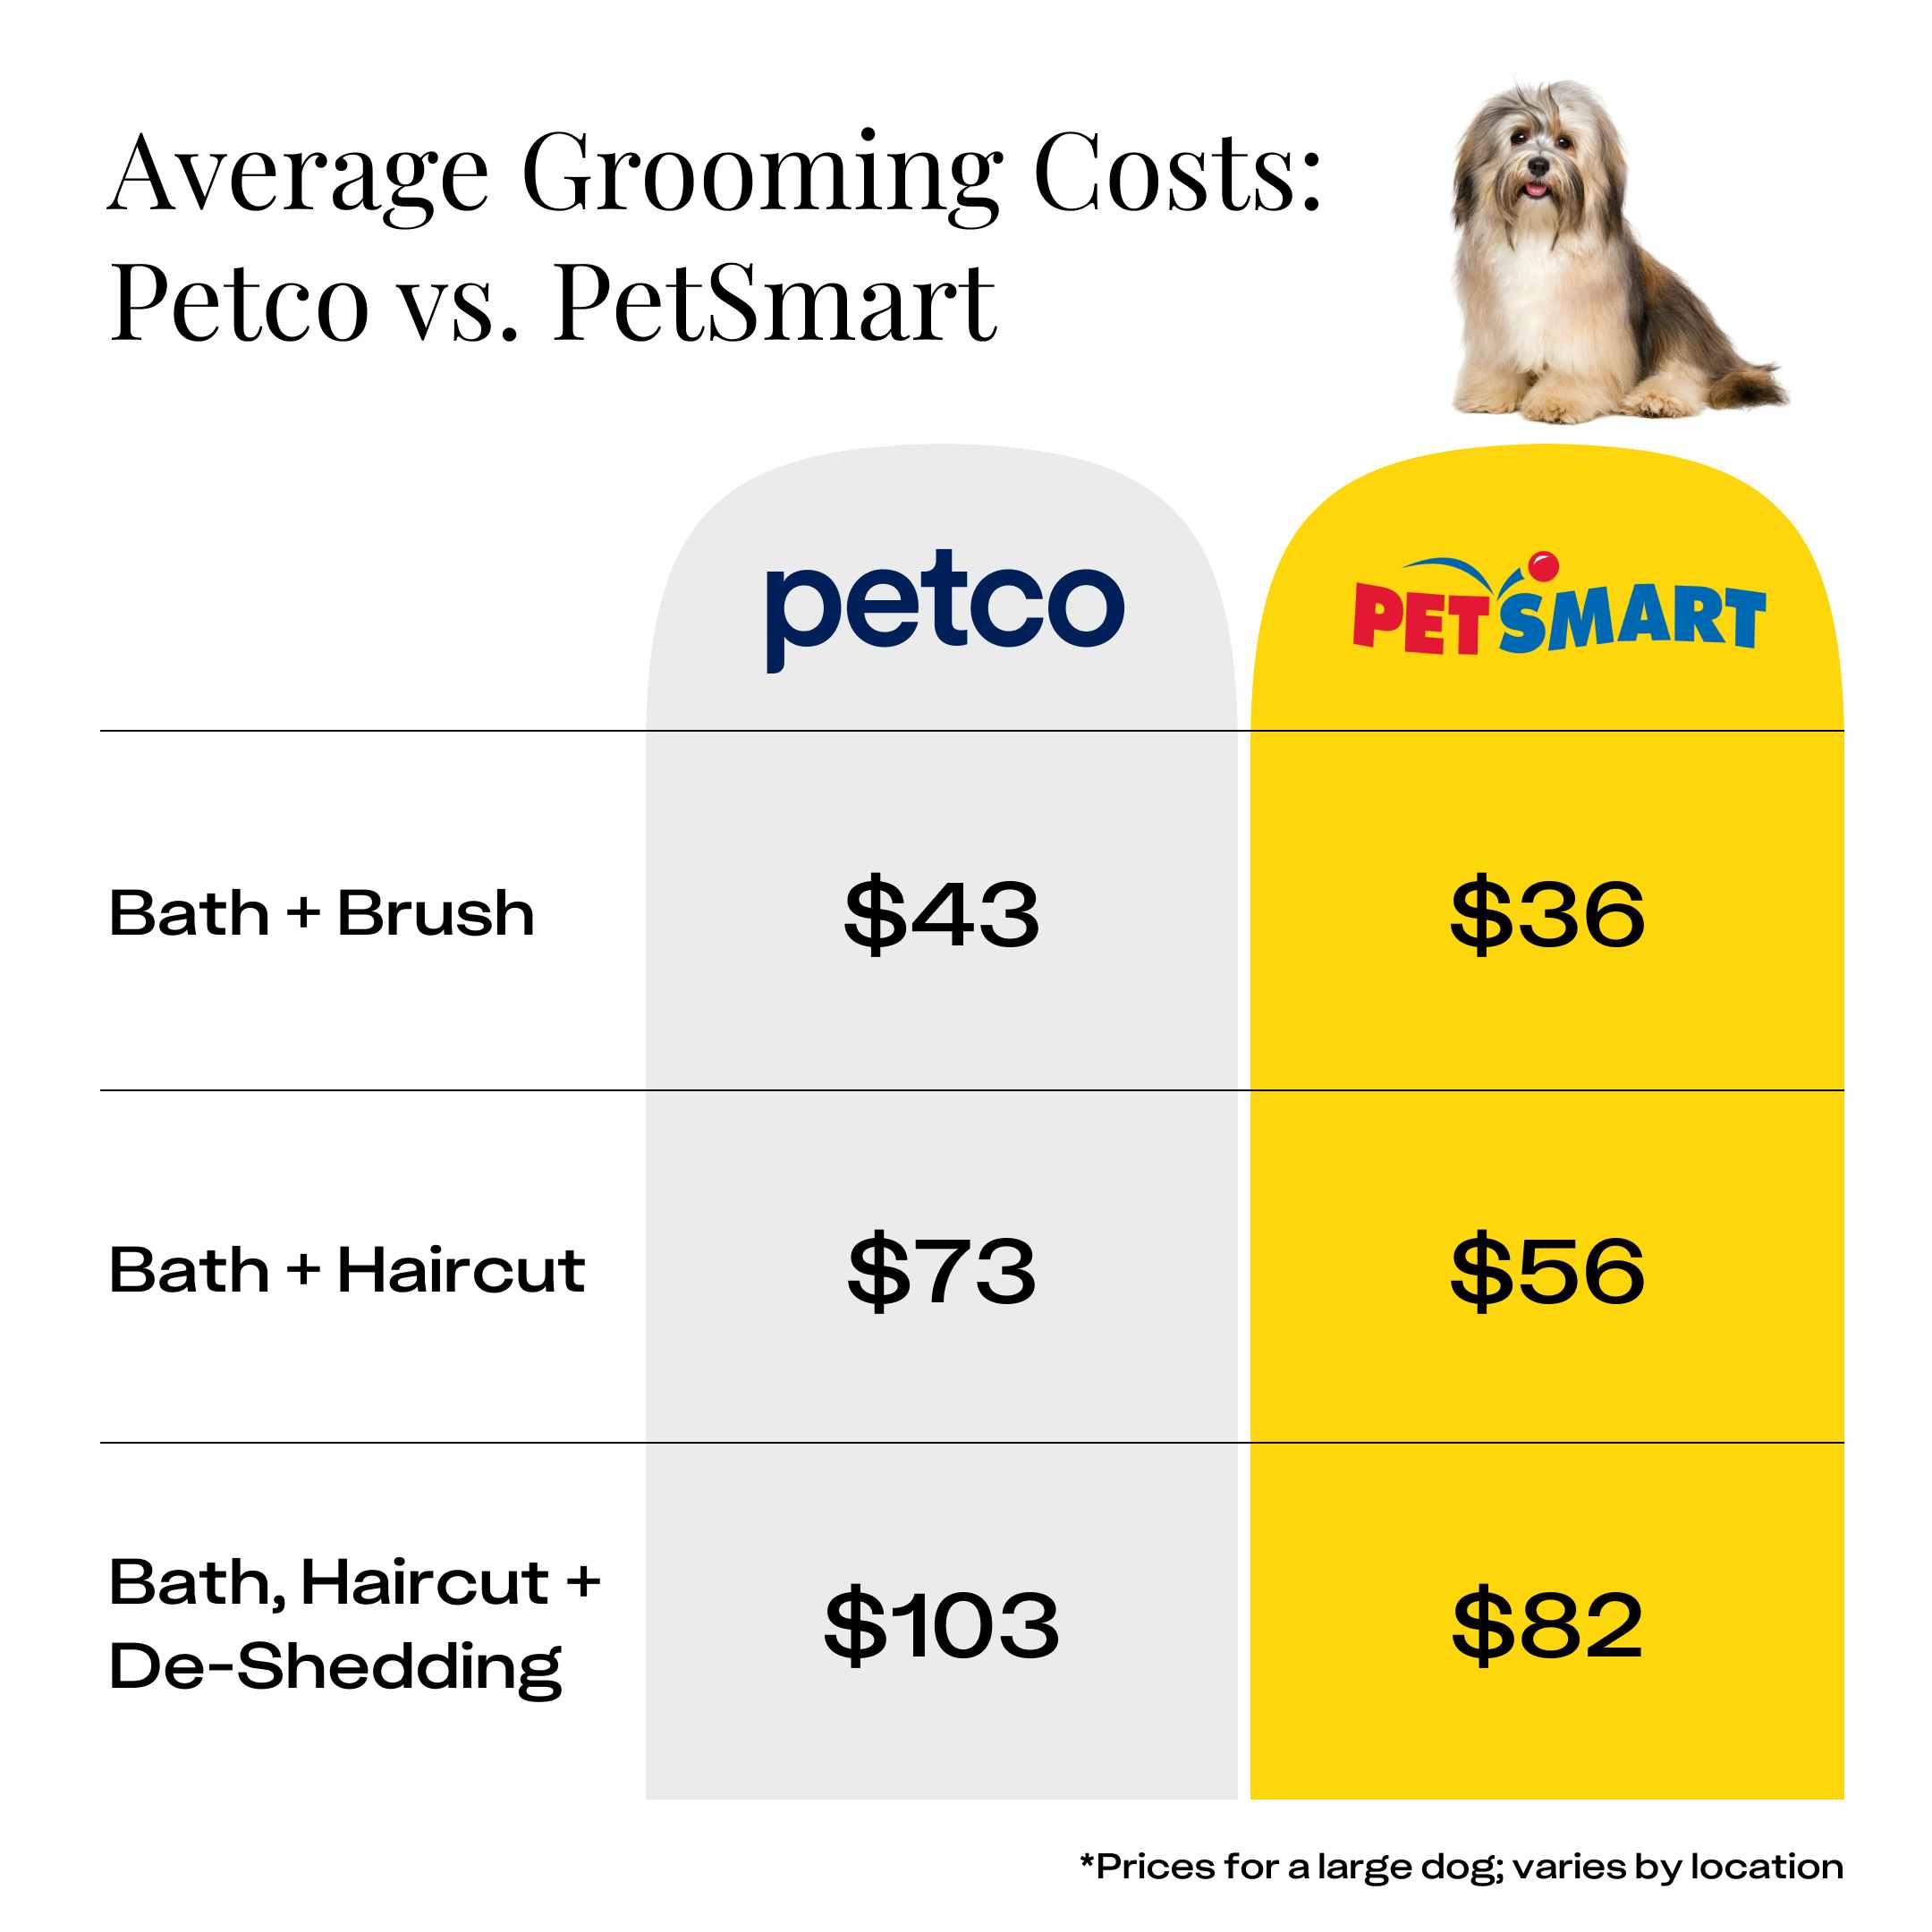 the average prices for grooming services at Petco and PetSmart